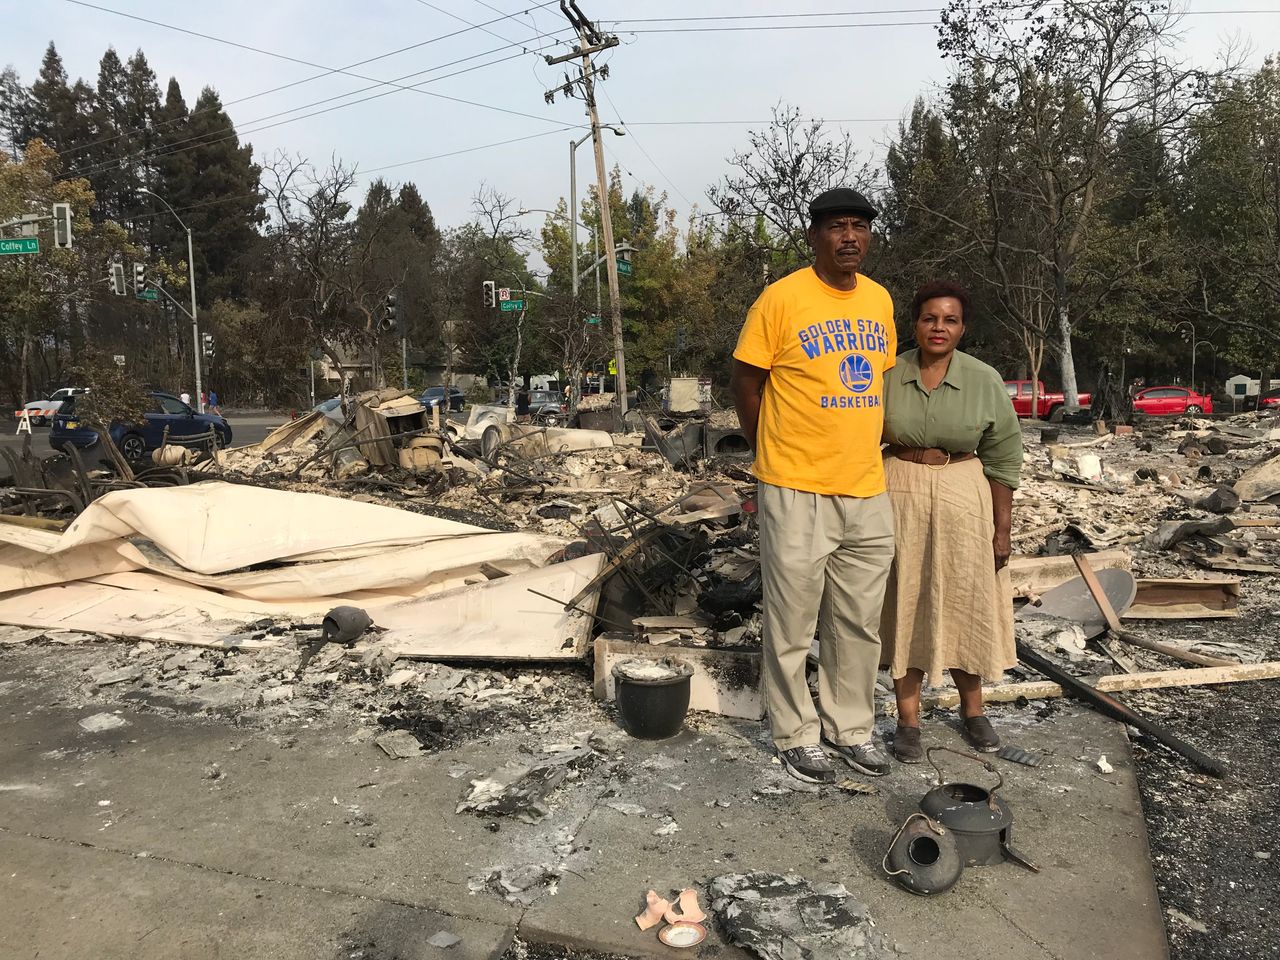 Marion Heim, right, and husband Lloid Heim stand on the ashes where their house used to be, in the days after the fire -- Oct. 2017, Santa Rosa, Calif.